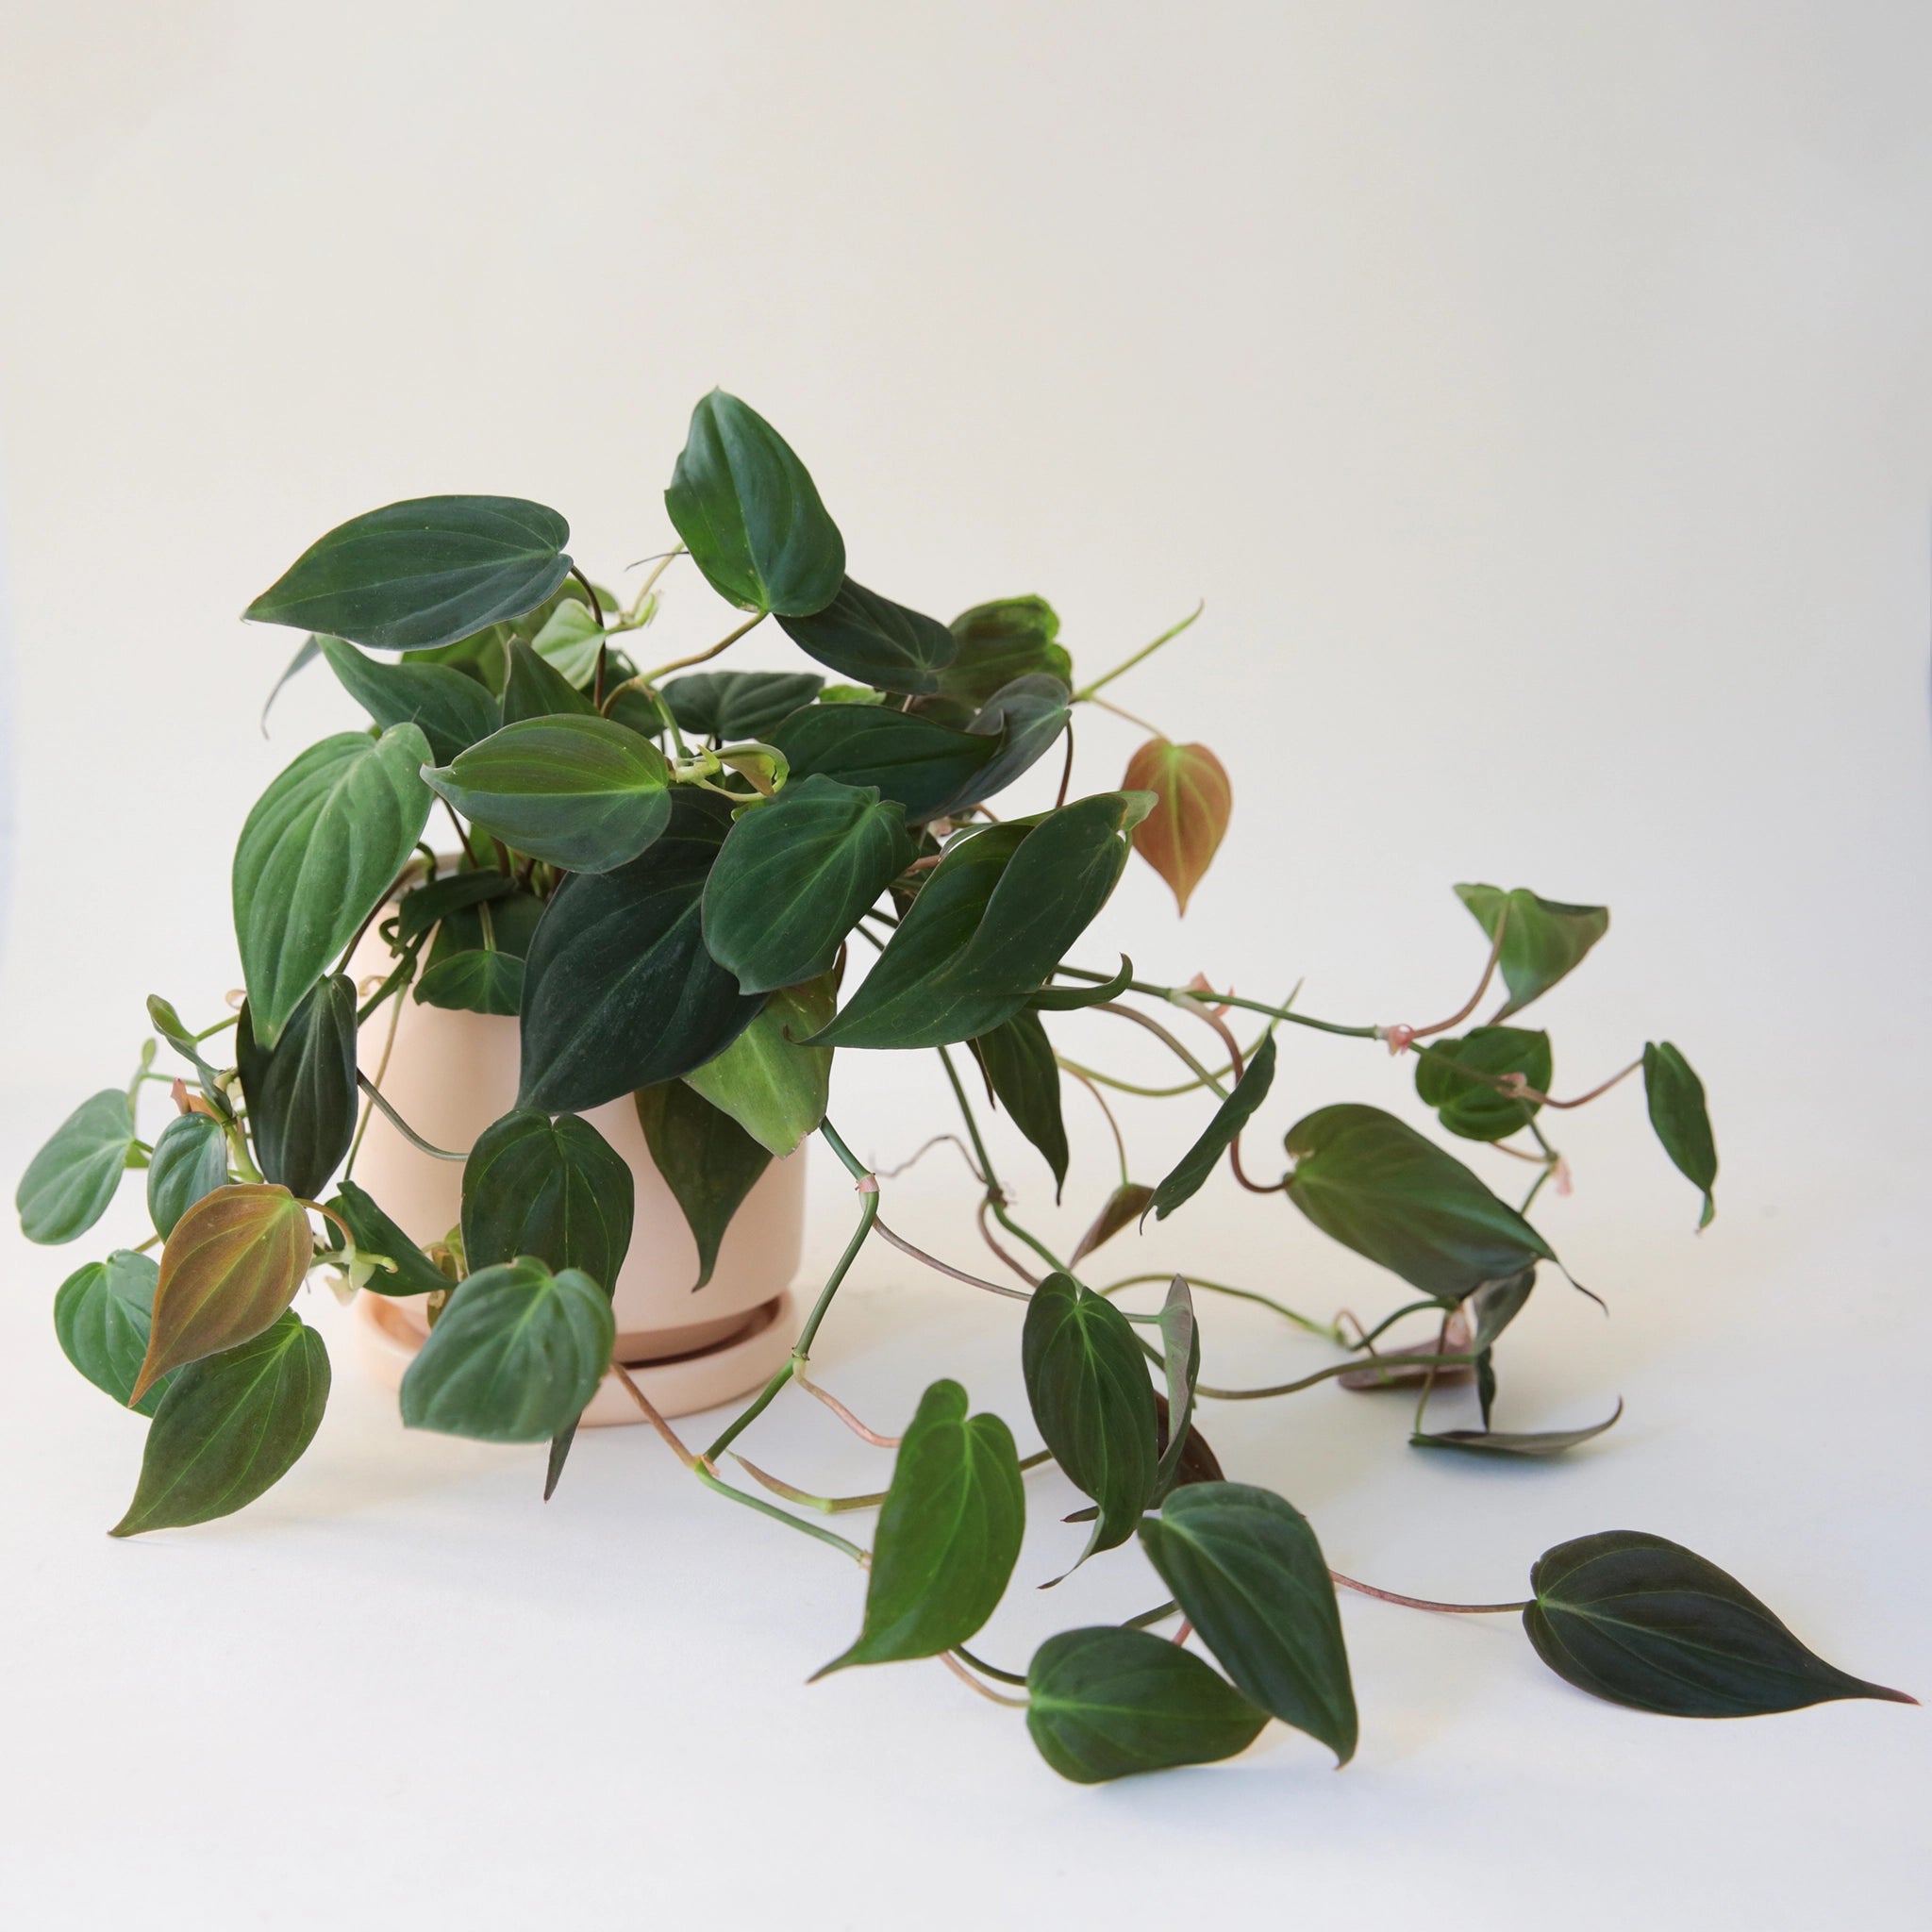 In front of a white background is a light pink circular pot. Inside the pot is a philodendron mican inside the pot. The plant has dark green leaves that are pointed at the top. 